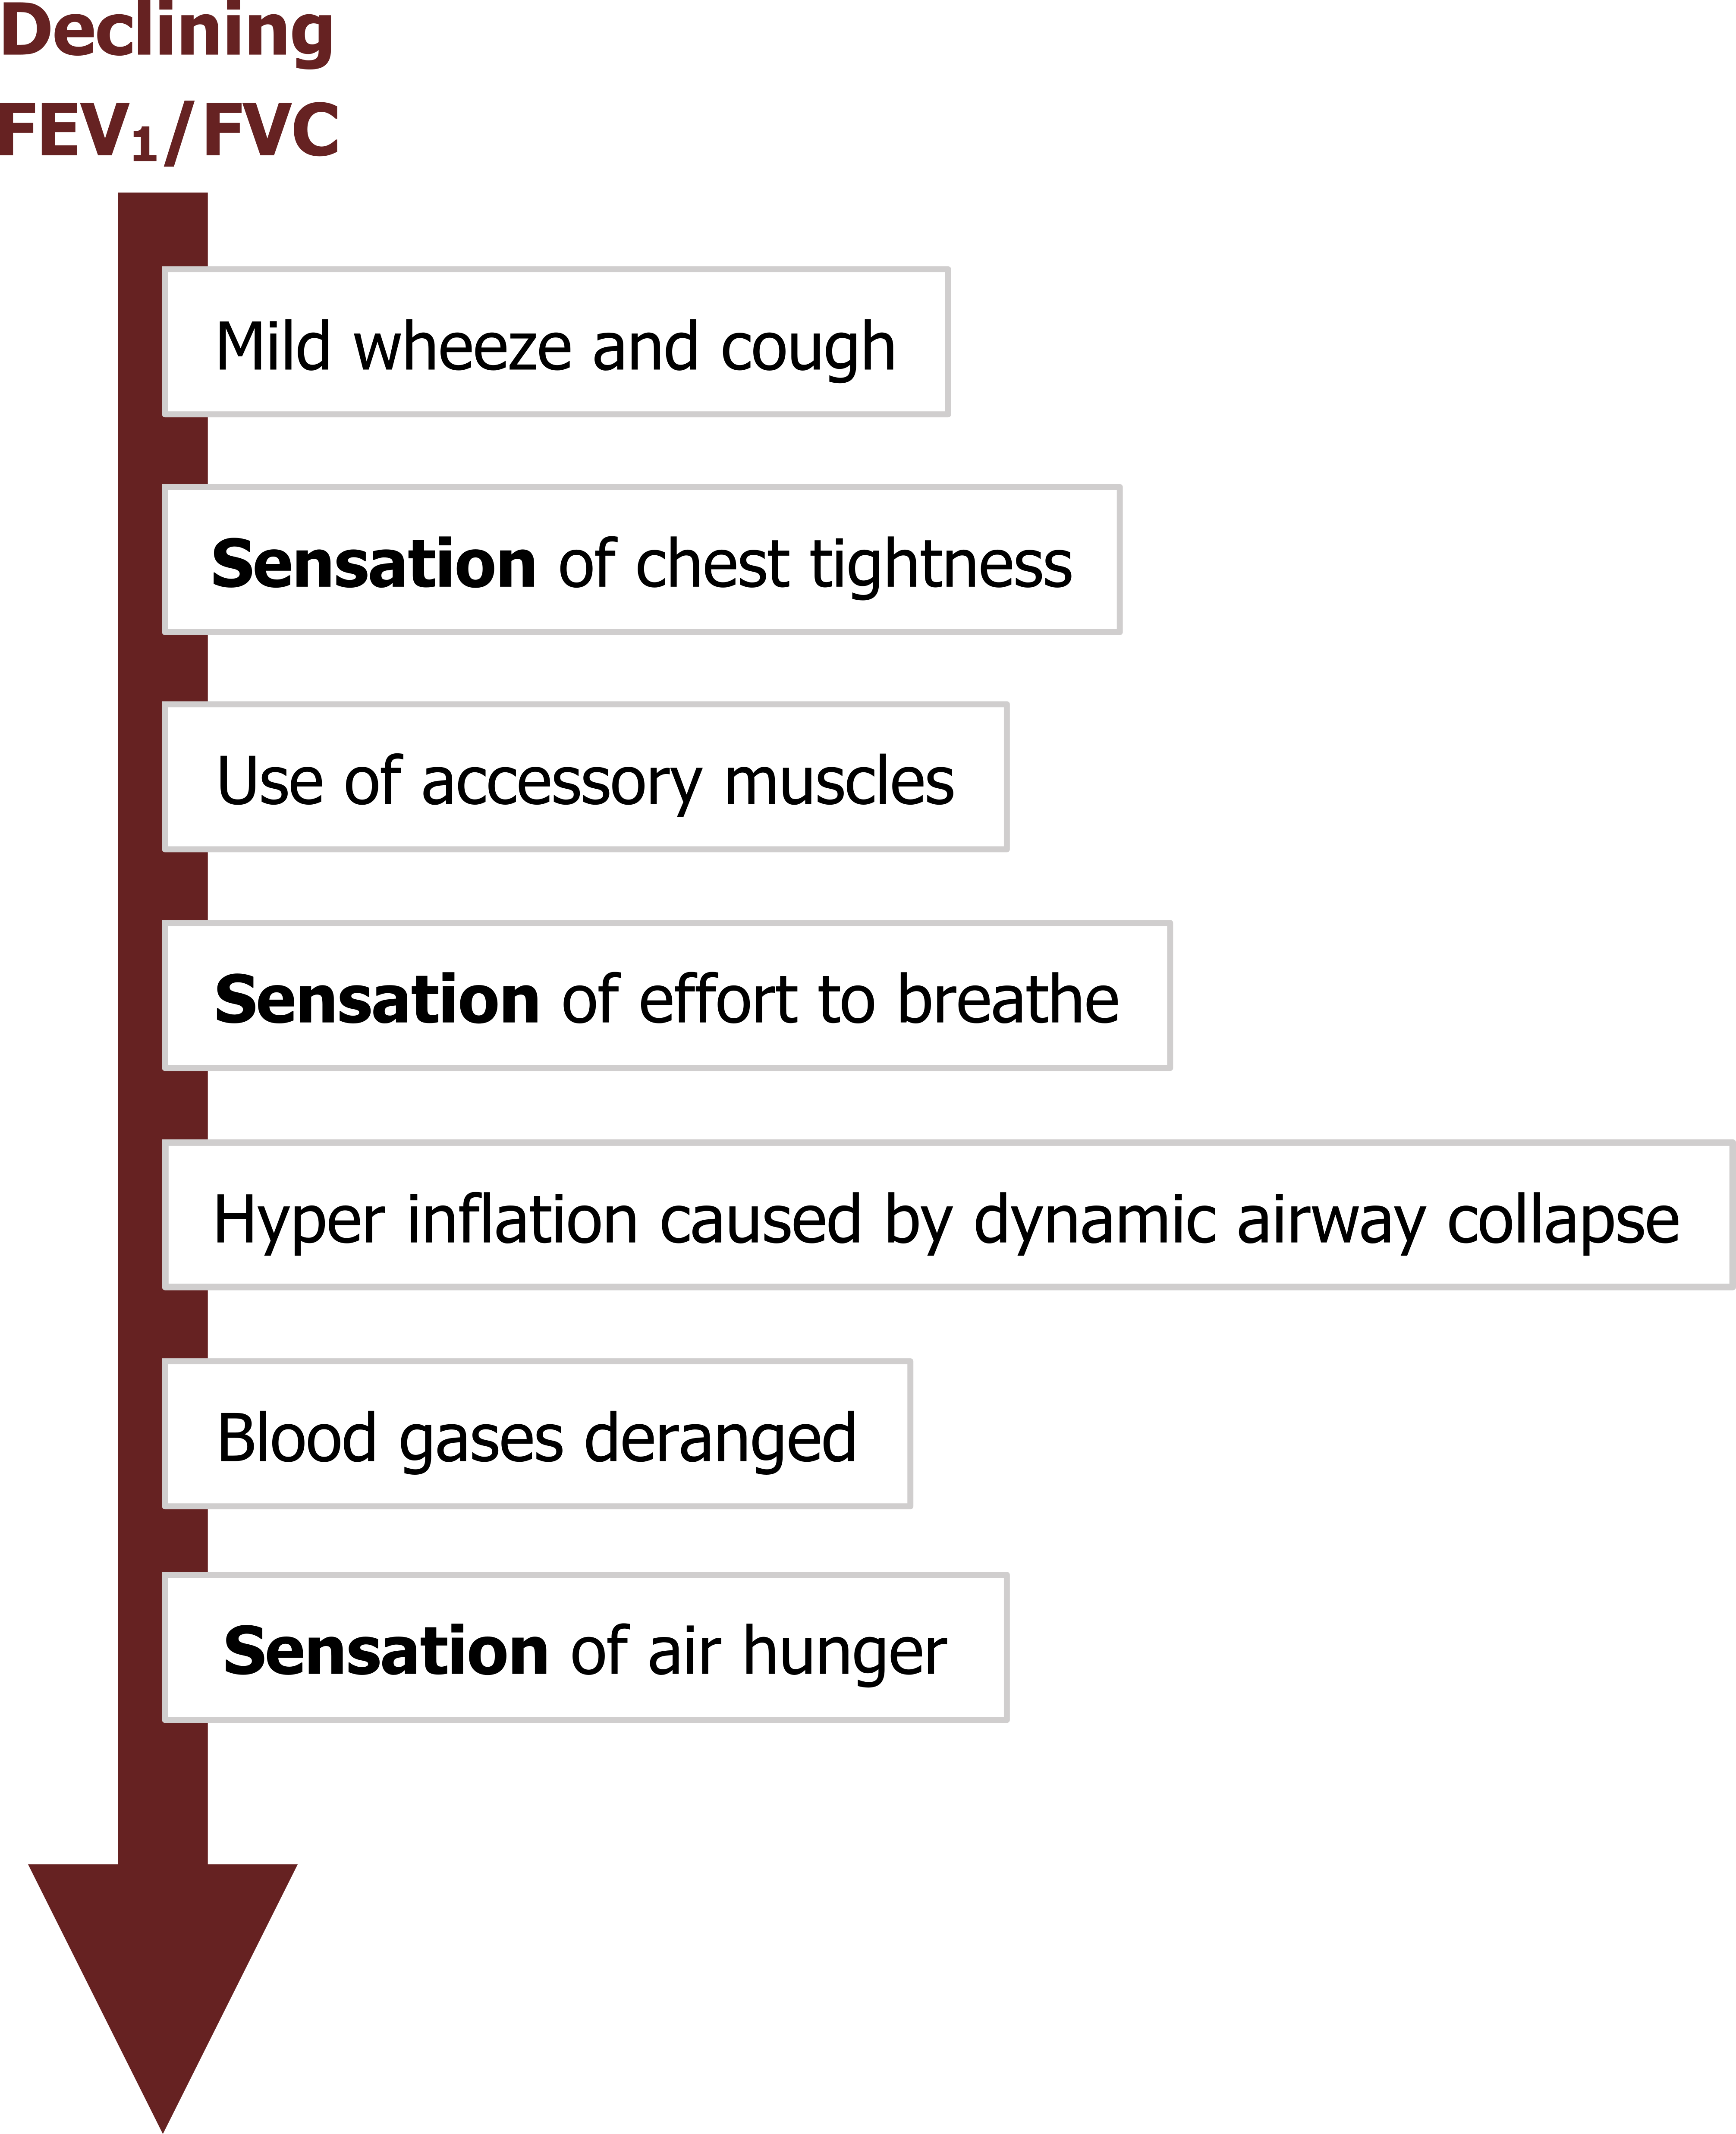 Arrow pointing downwards with text Declining FEV1/FVC. From top to bottom: Mild wheeze and cough, sensation of chest tightness, use of accessory muscles, sensation of effort to breathe, hyperinflation - dynamic airway collapse, blood gases deranged, sensation of air hunger.